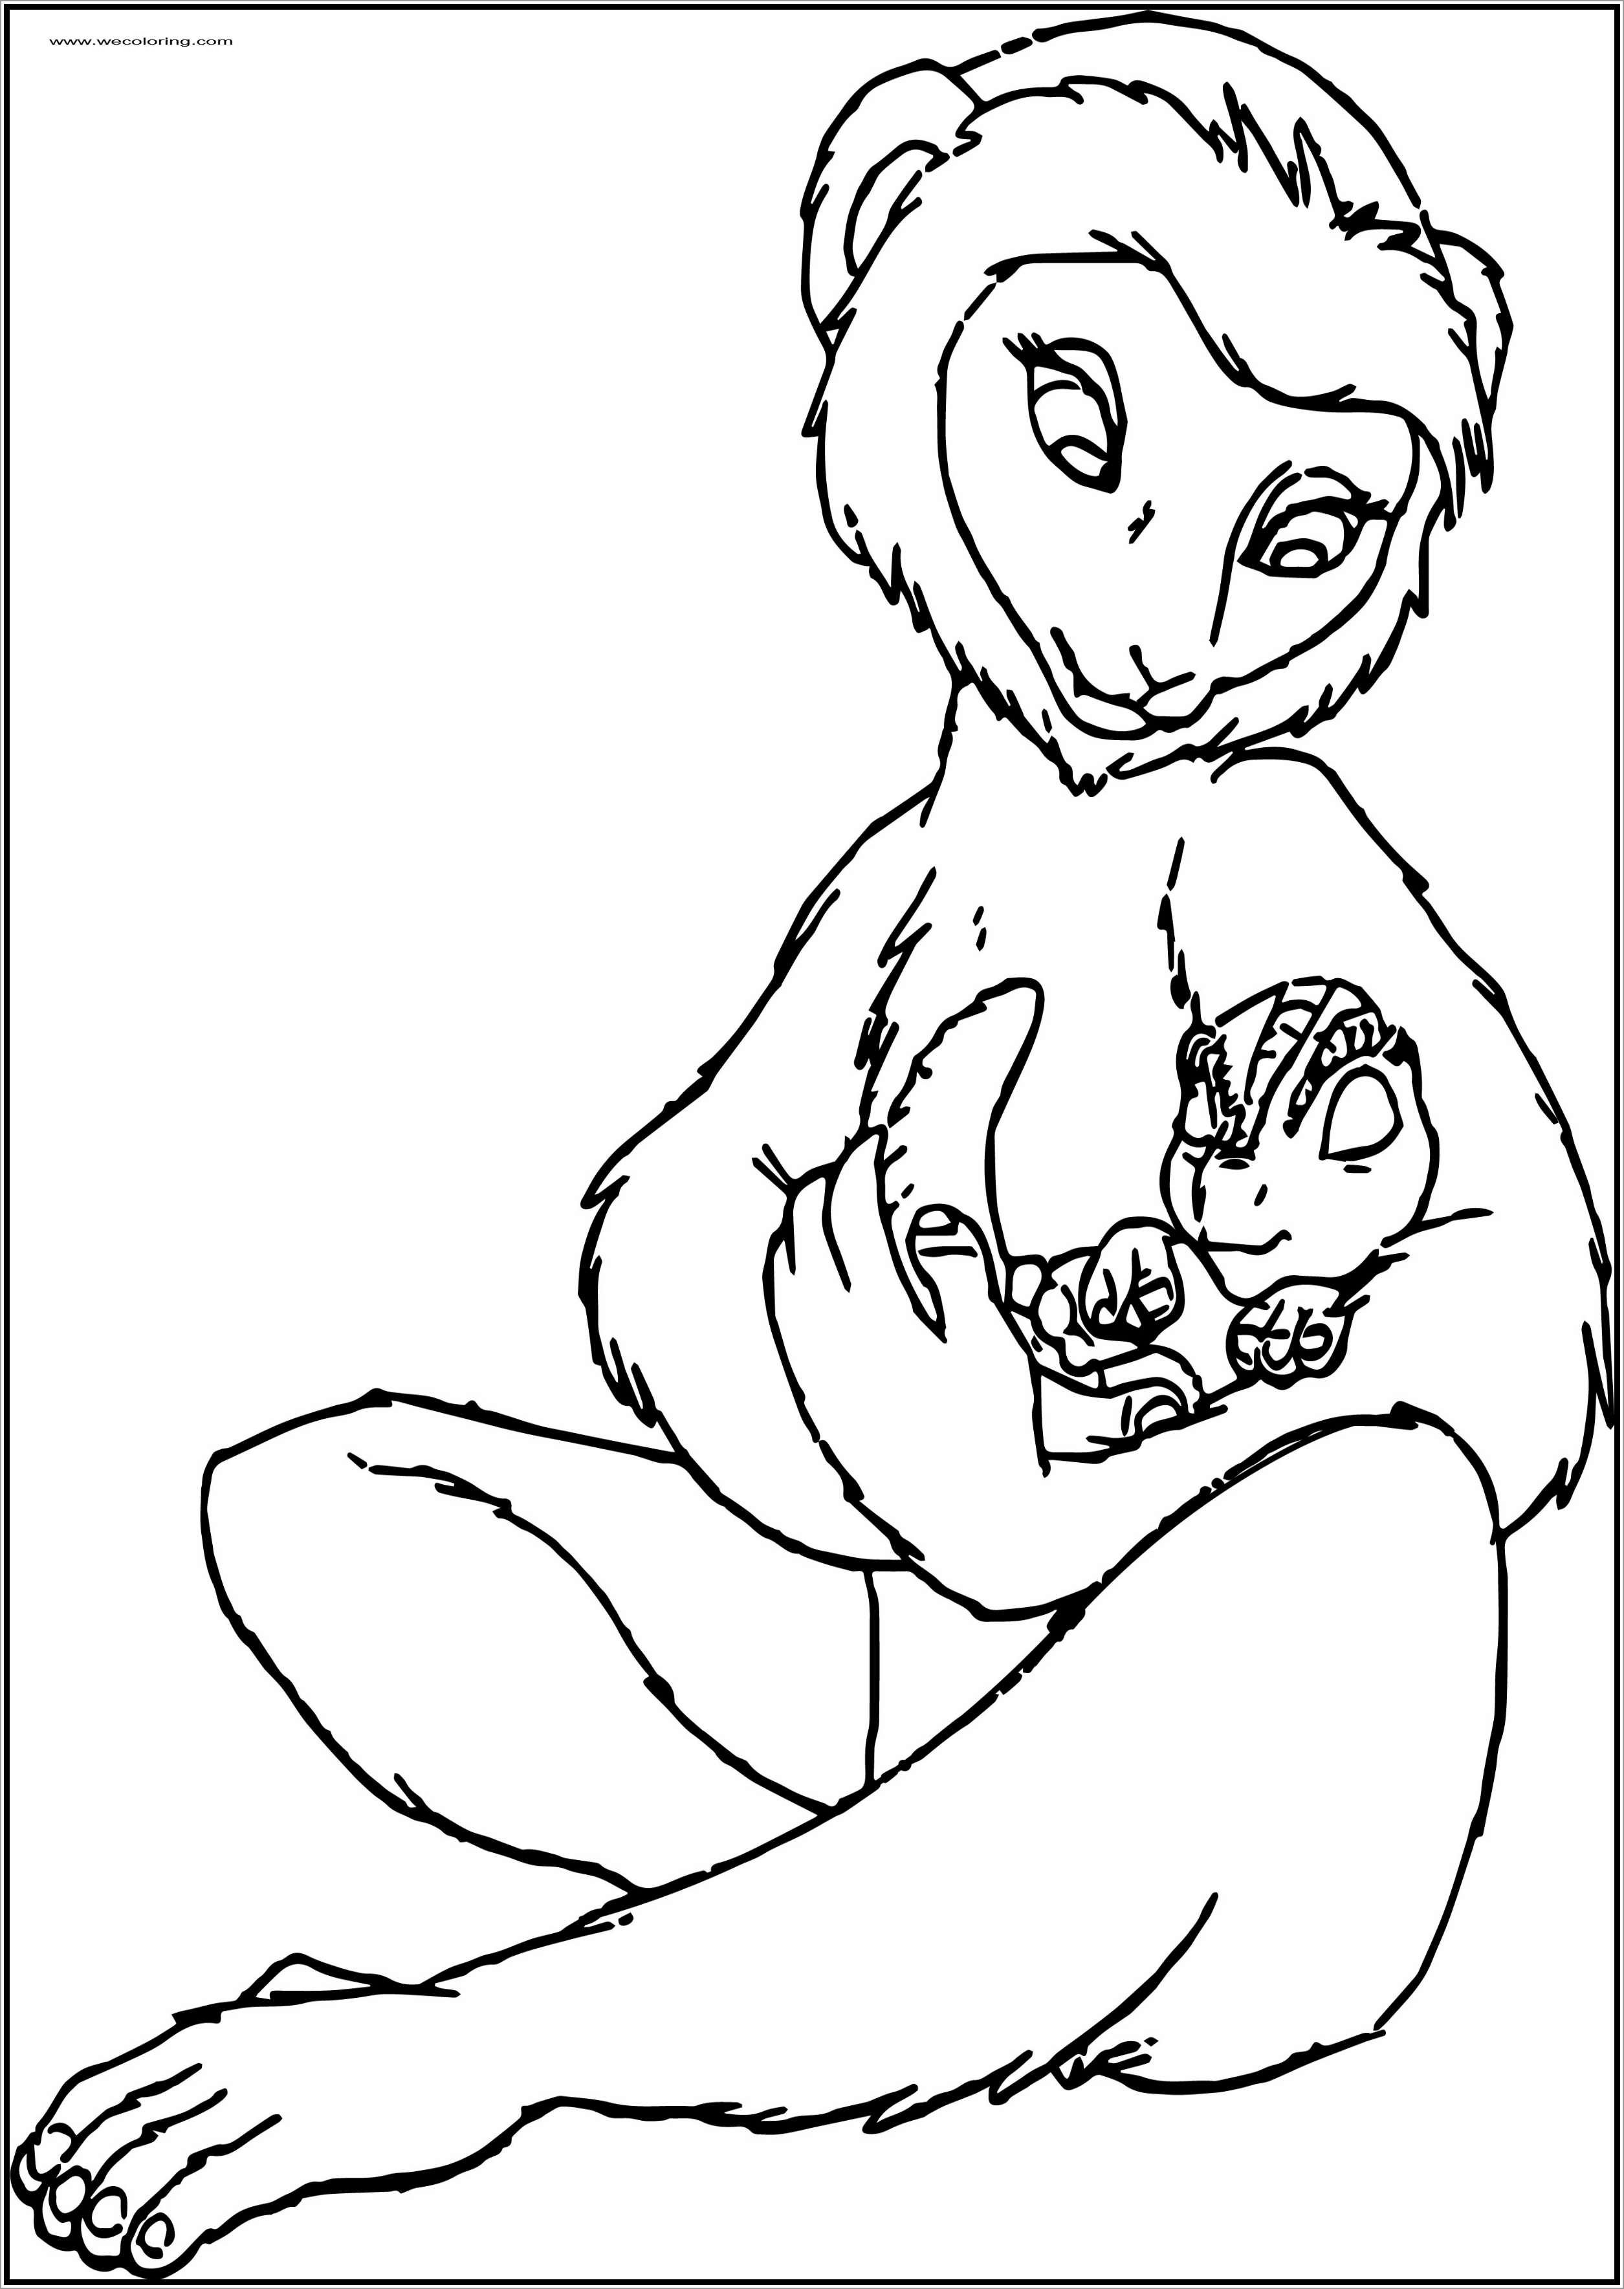 Printable Lemur and Baby Coloring Page